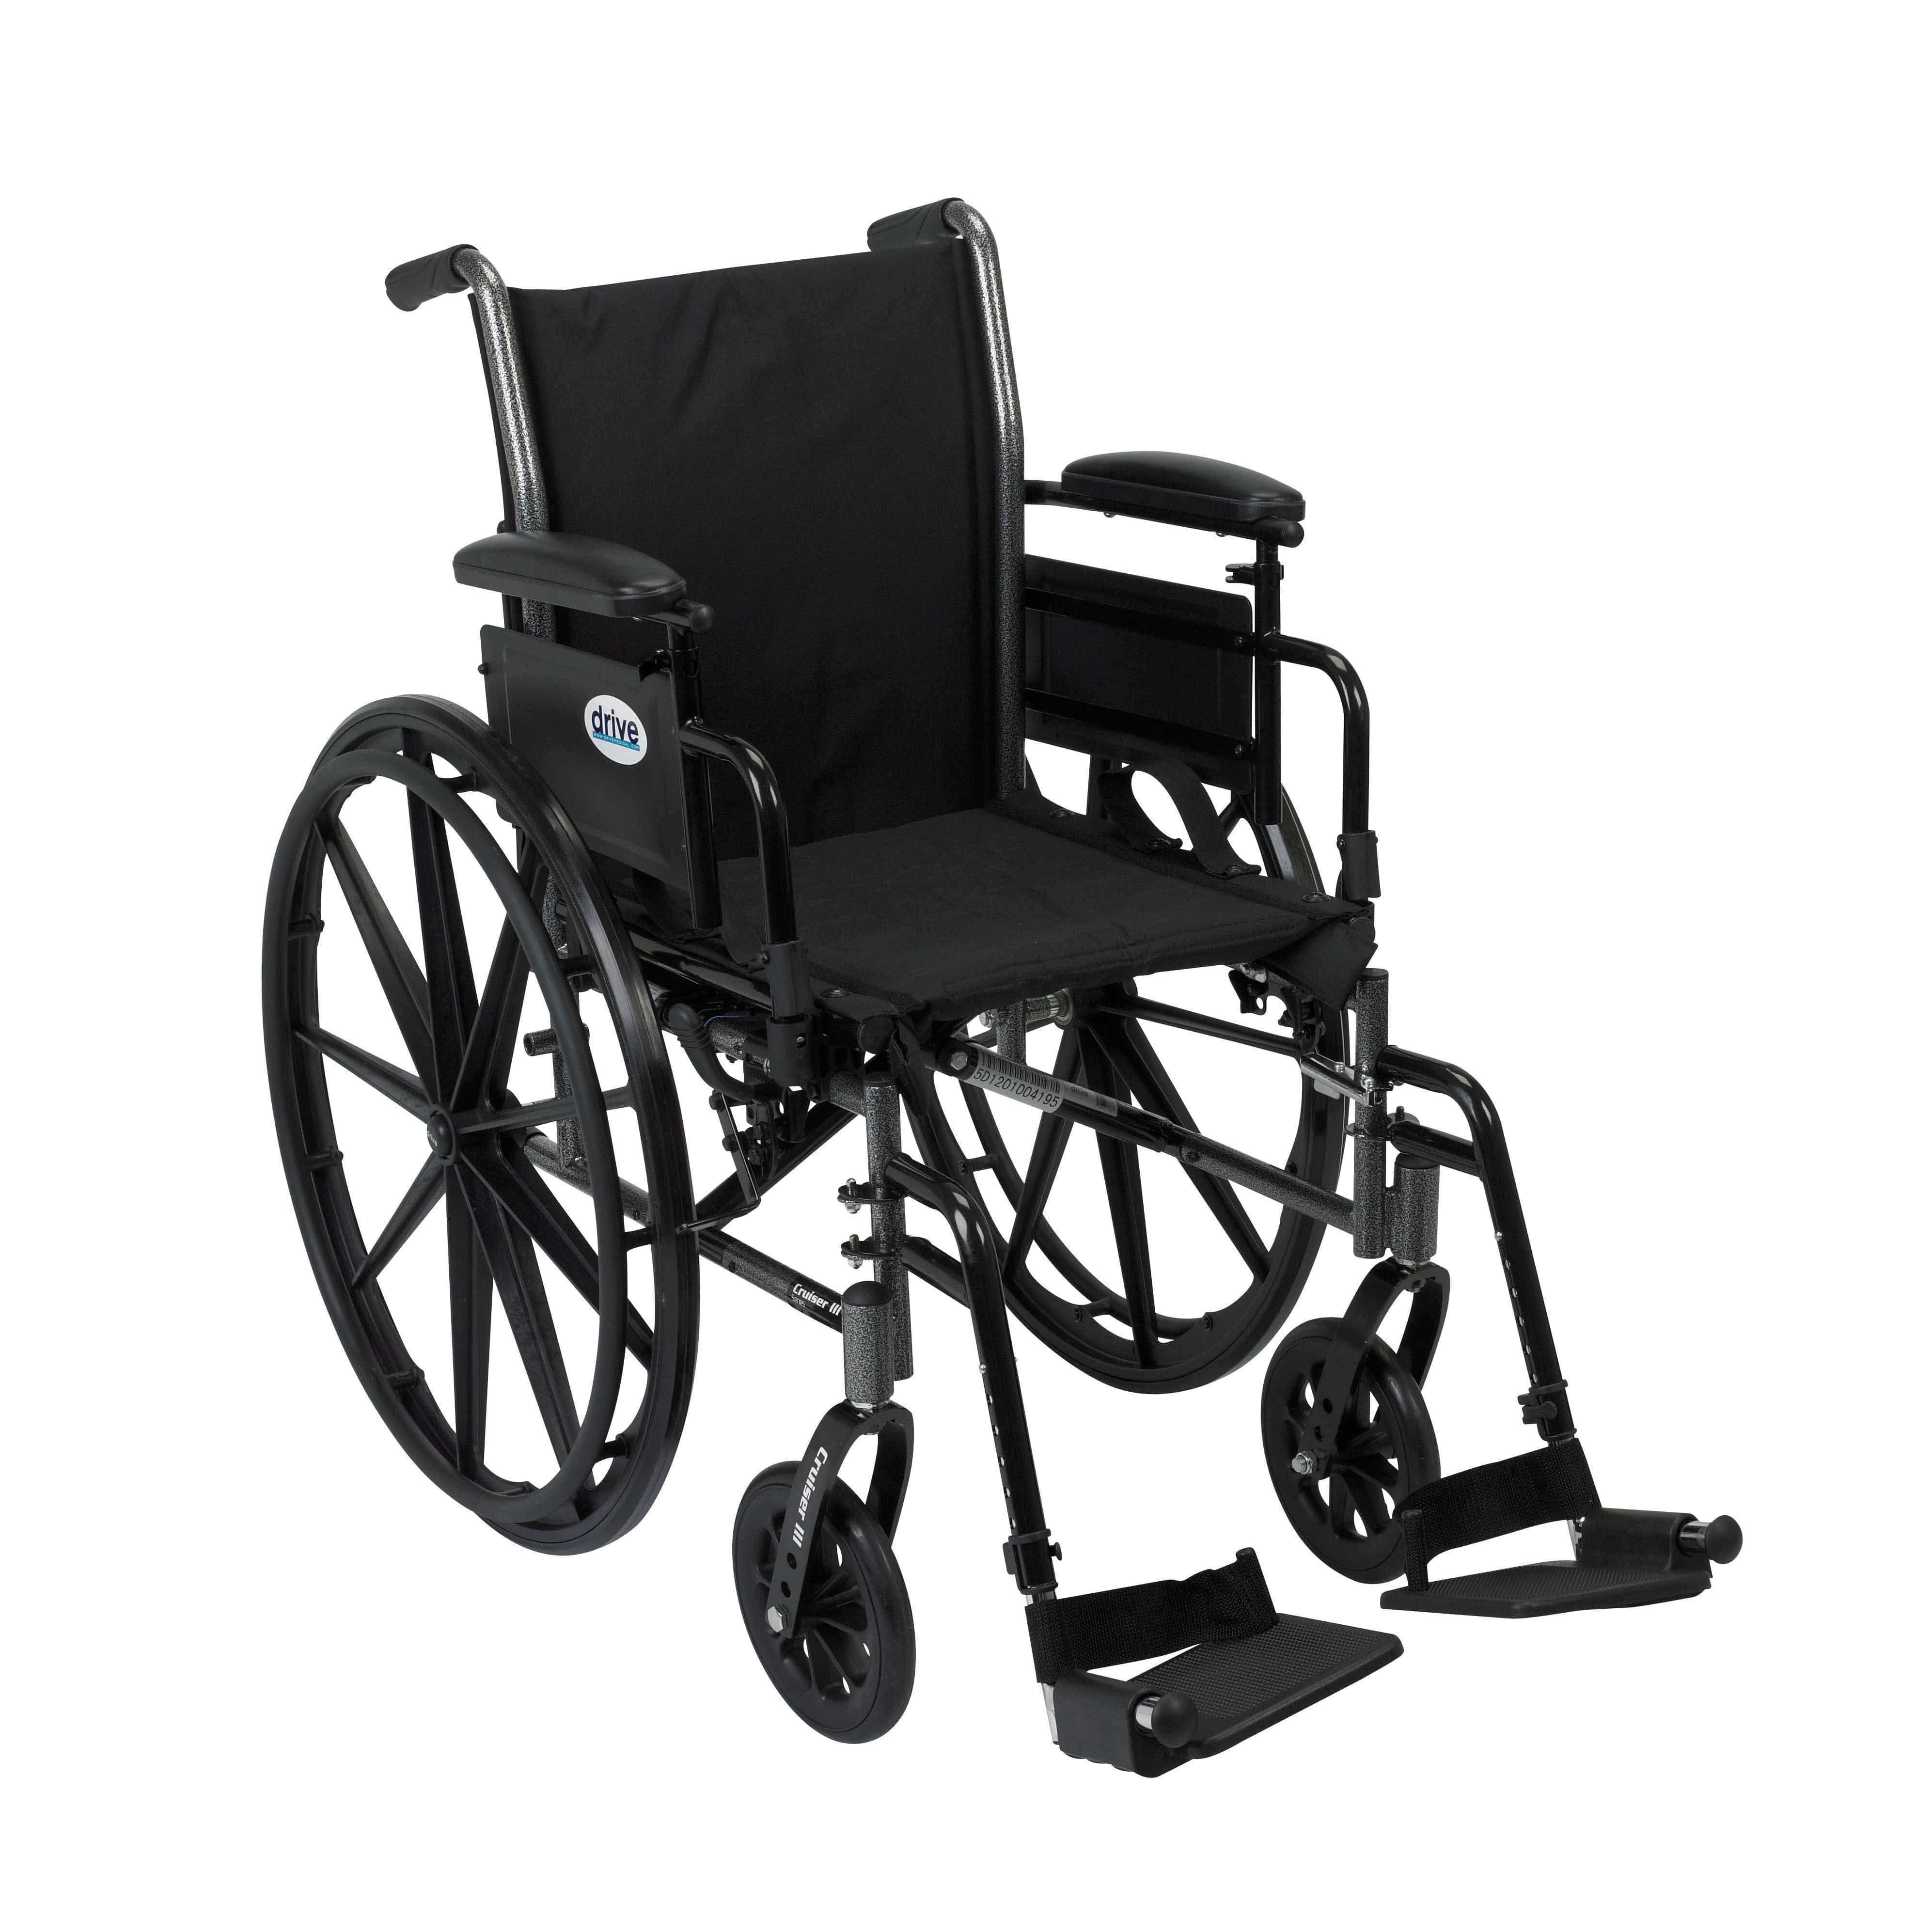 Drive Medical Wheelchairs Flip Back Removable Adjustable Height Desk Arms and Swing away Footrests / 20" Seat Drive Medical Cruiser III Light Weight Wheelchair with Flip Back Removable Arms